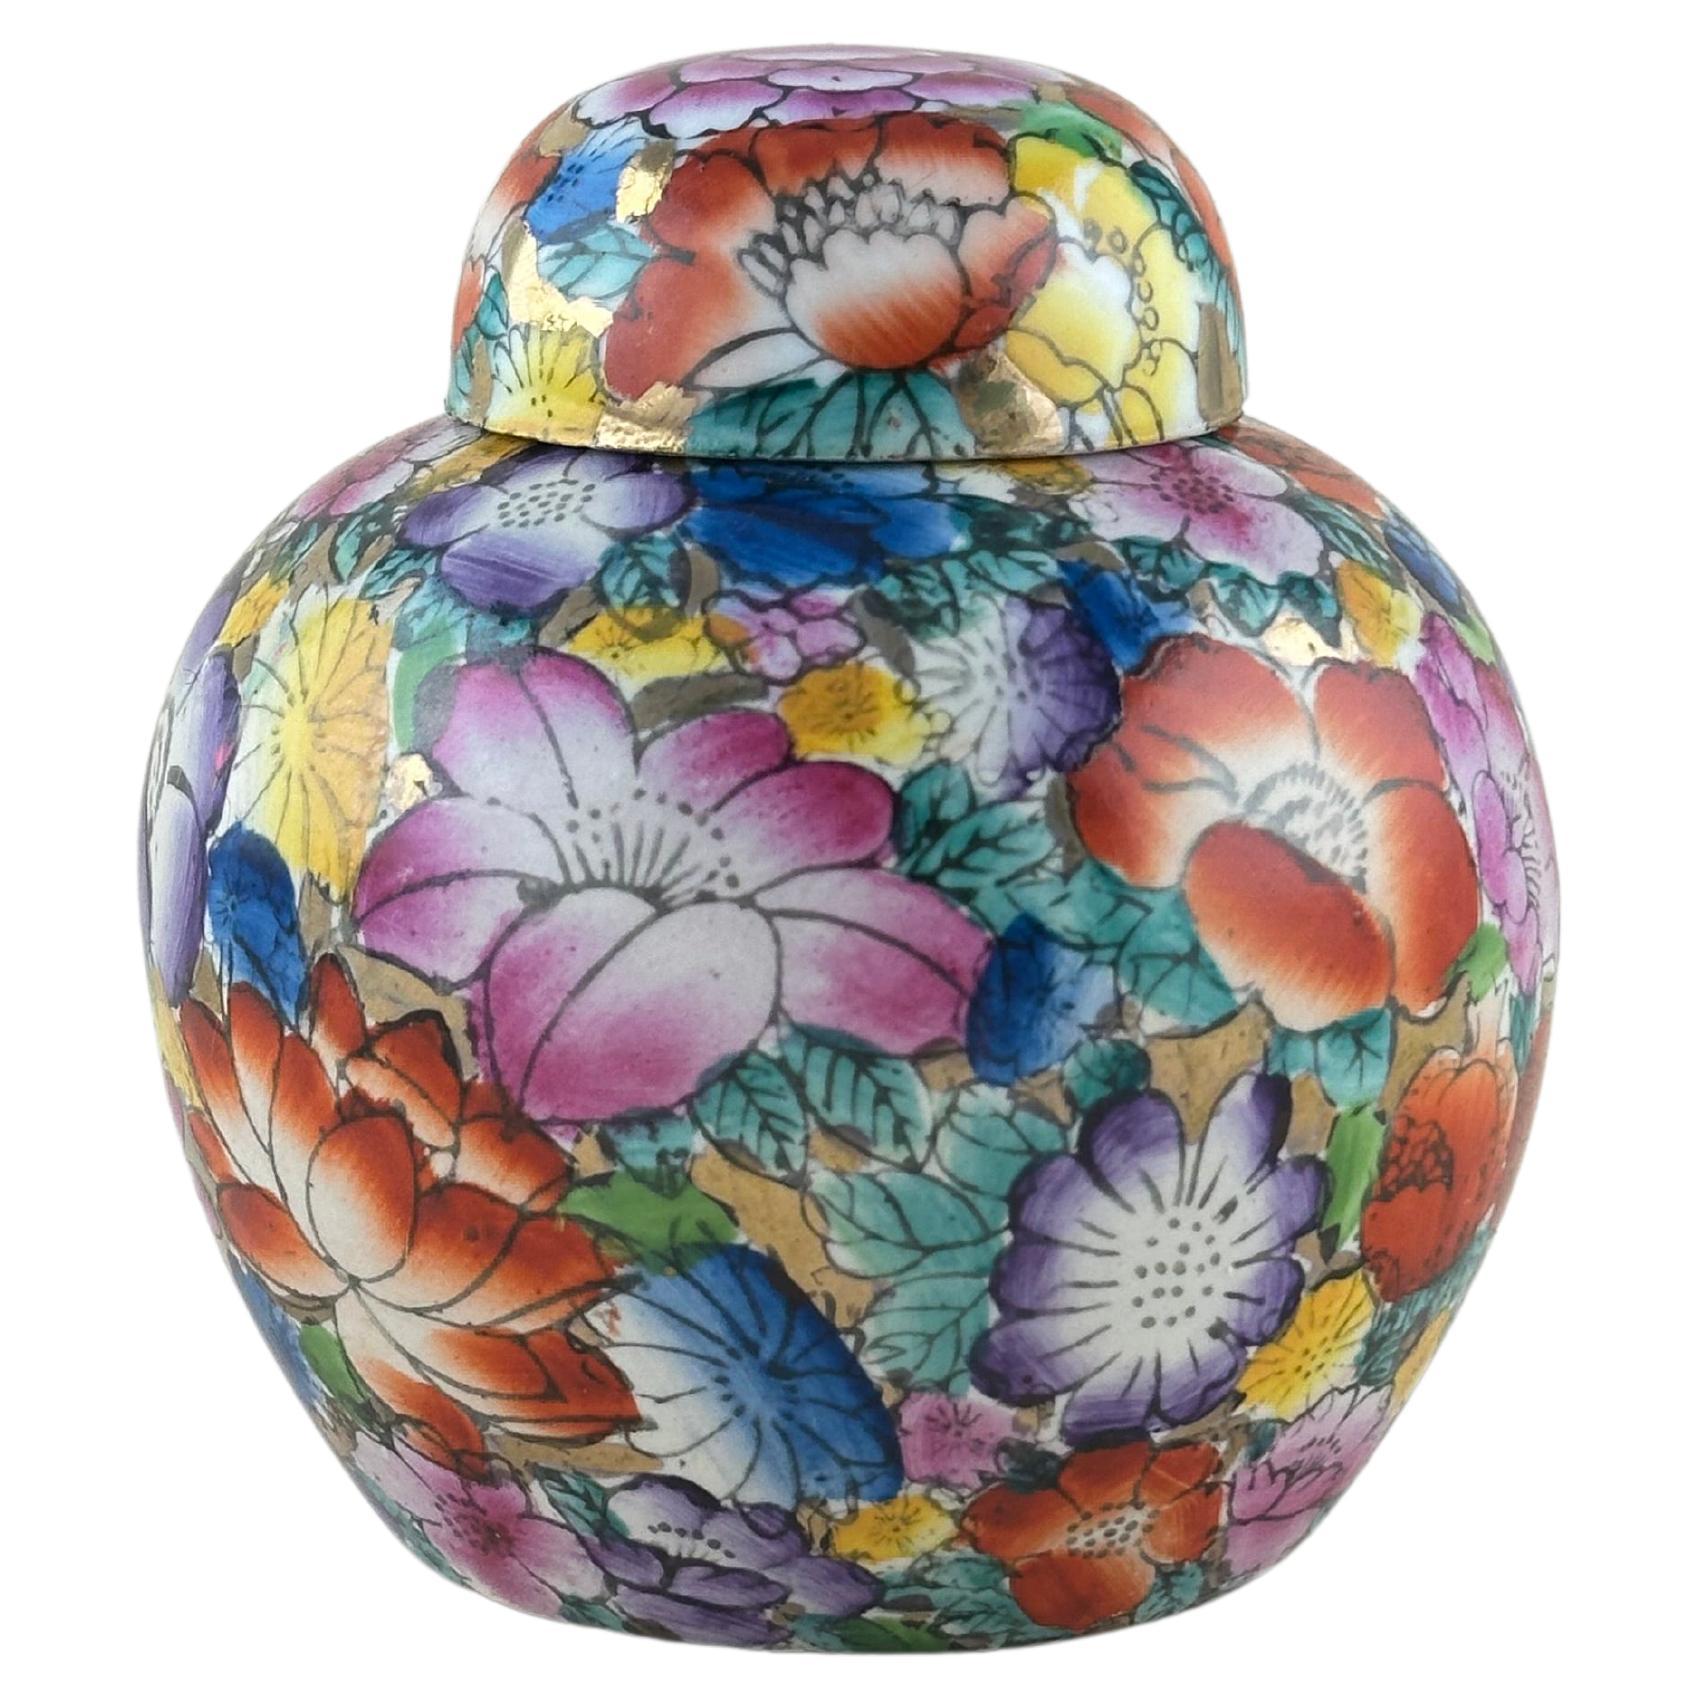 What does a Chinese ginger jar look like?